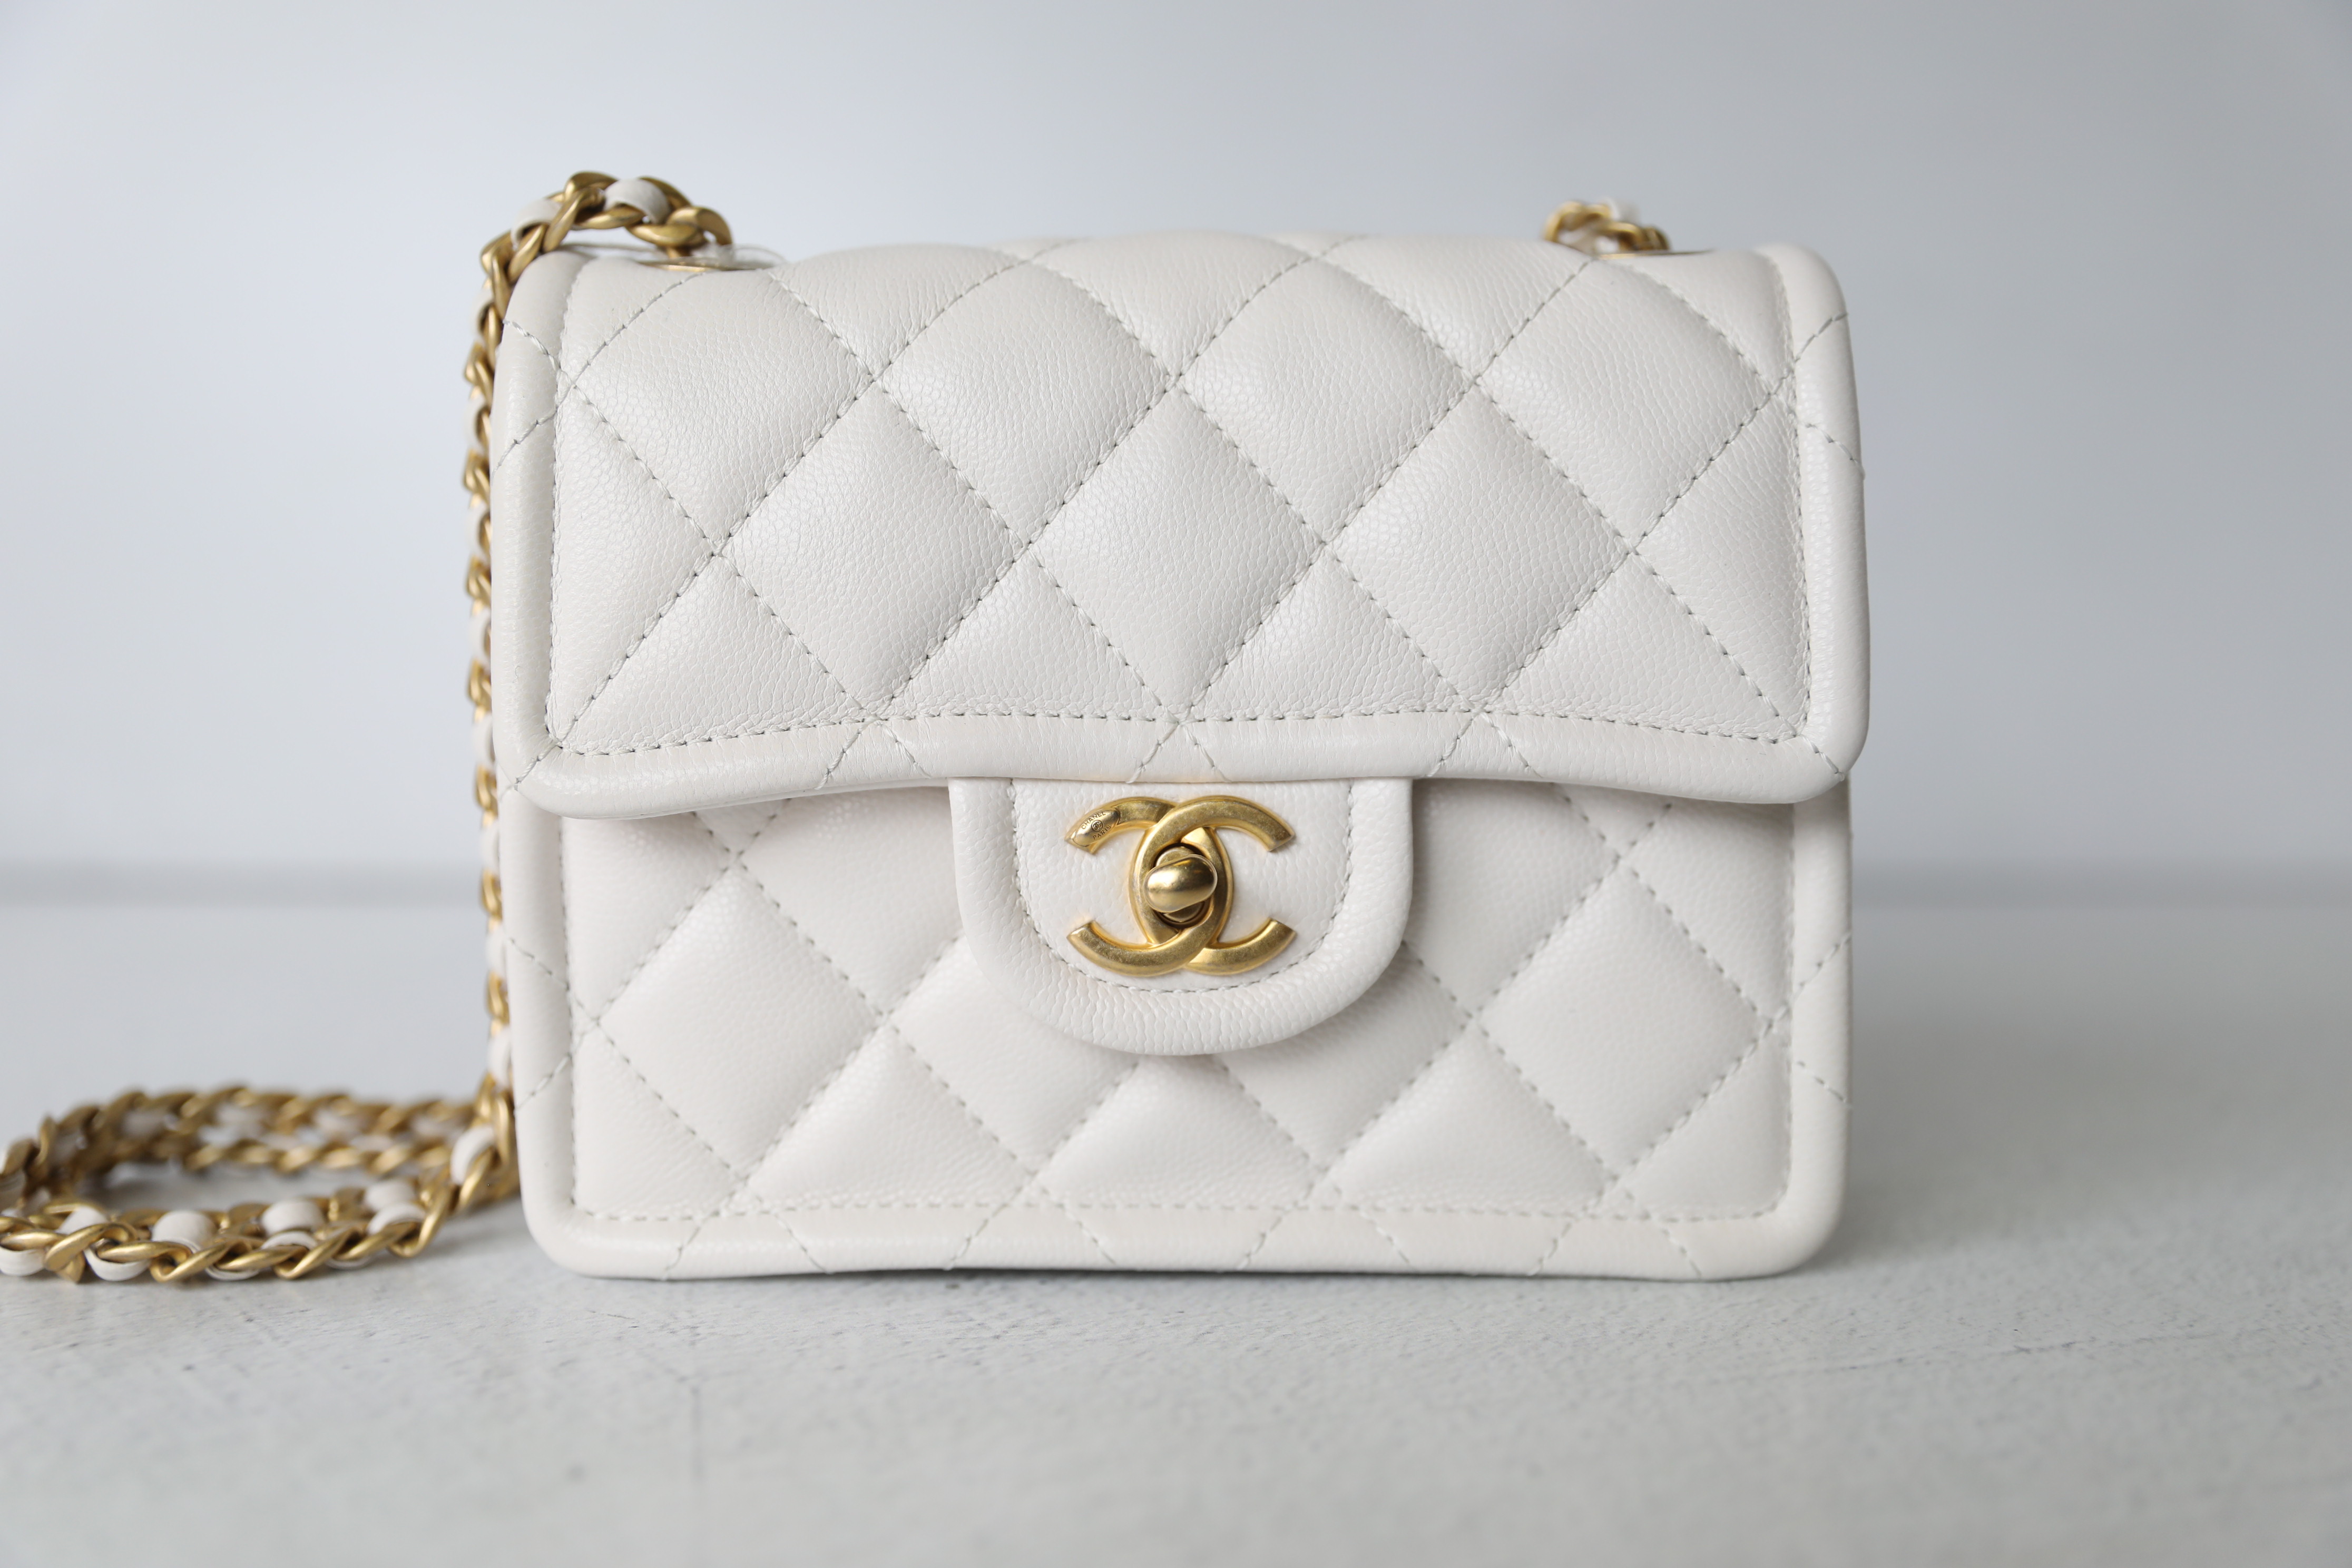 Chanel Sweet Mini Flap, White with Gold Hardware, Preowned in Box